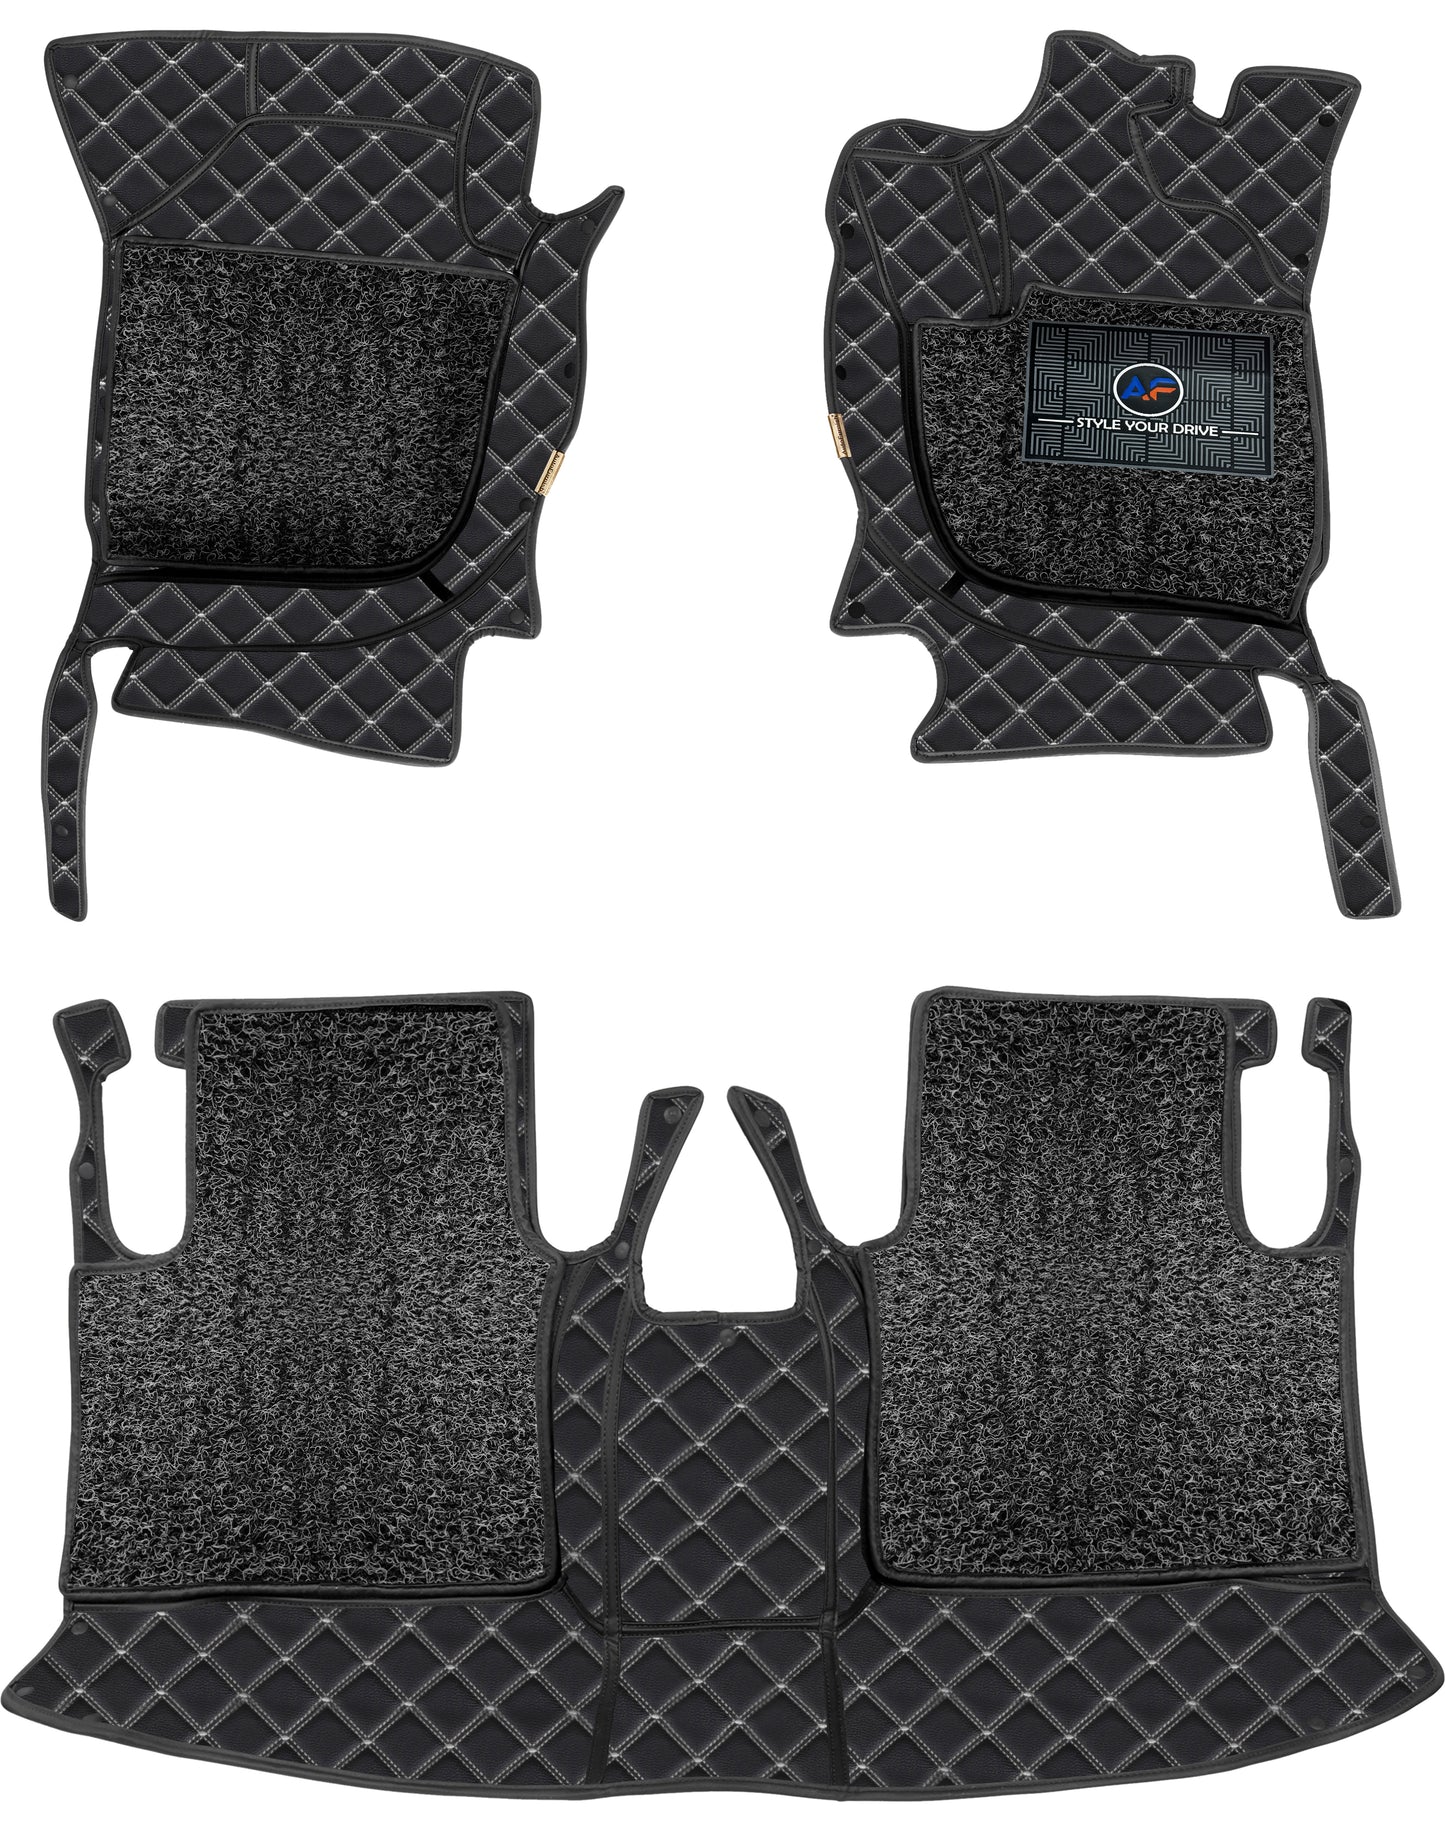 Toyota Urban Cruiser 2020-7D Luxury Car Mat, All Weather Proof, Anti-Skid, 100% Waterproof & Odorless with Unique Diamond Fish Design (24mm Luxury PU Leather, 2 Rows)